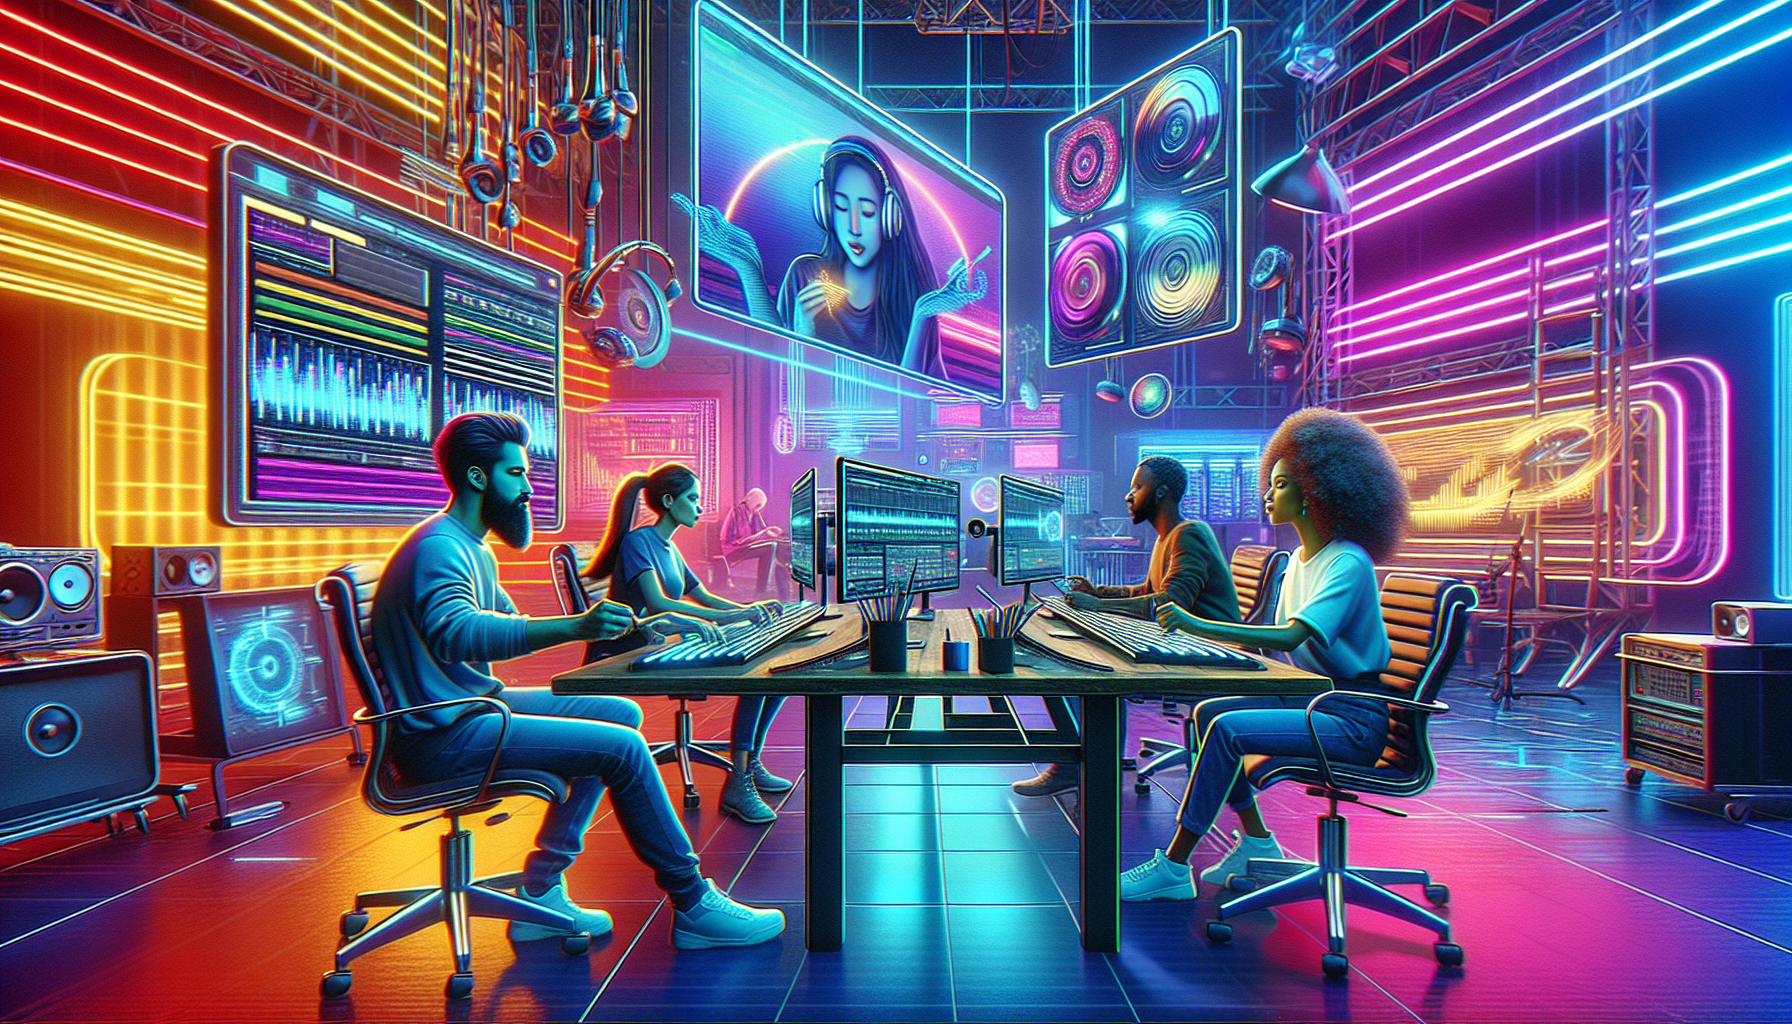 A futuristic music video set design, showcasing a diverse group of screenwriters using advanced AI technology on large holographic screens, brainstorming and generating dynamic storyboards, in a neon-